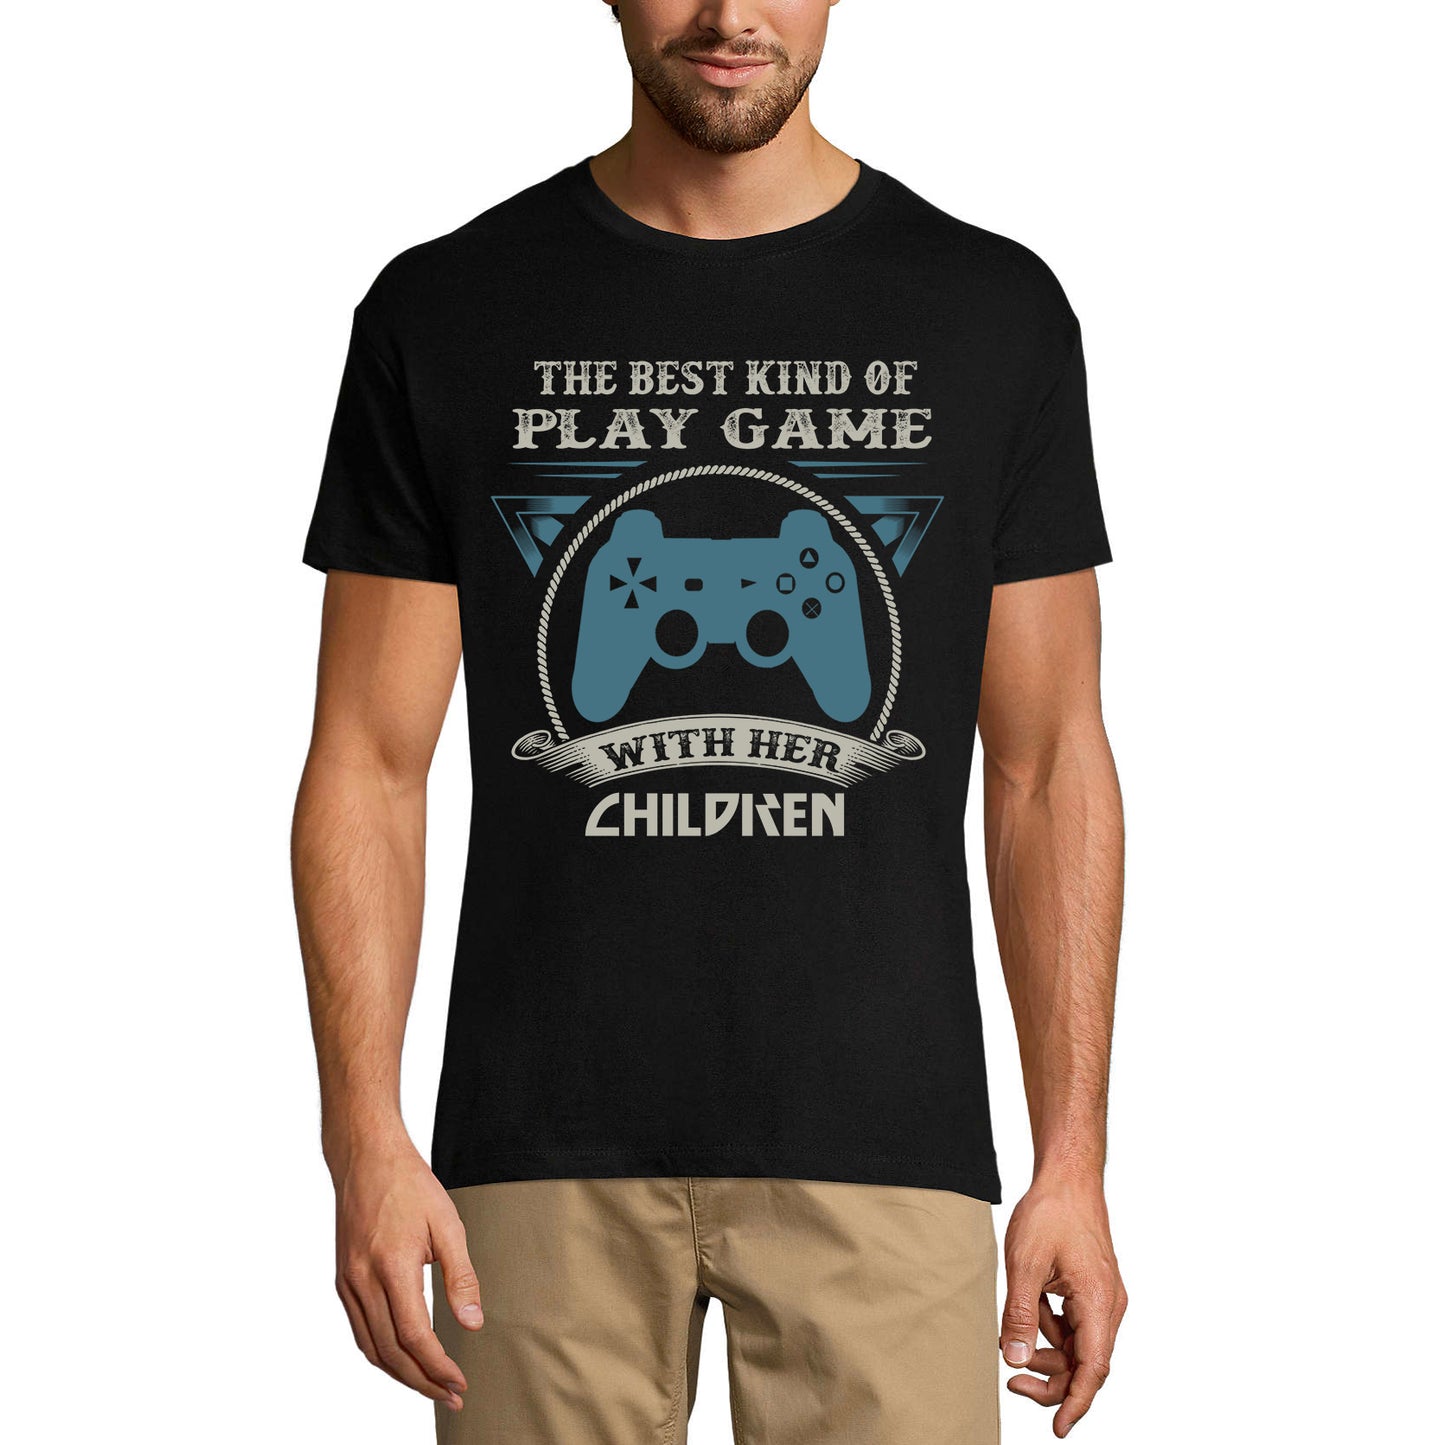 ULTRABASIC Graphic Men's T-Shirt Play Game With Her Children - Parenting Life parenting life dad awesome gamer i paused my game alien player ufo playstation tee shirt clothes gaming apparel gifts super mario nintendo call of duty graphic tshirt video game funny geek gift for the gamer fortnite pubg humor son father birthday